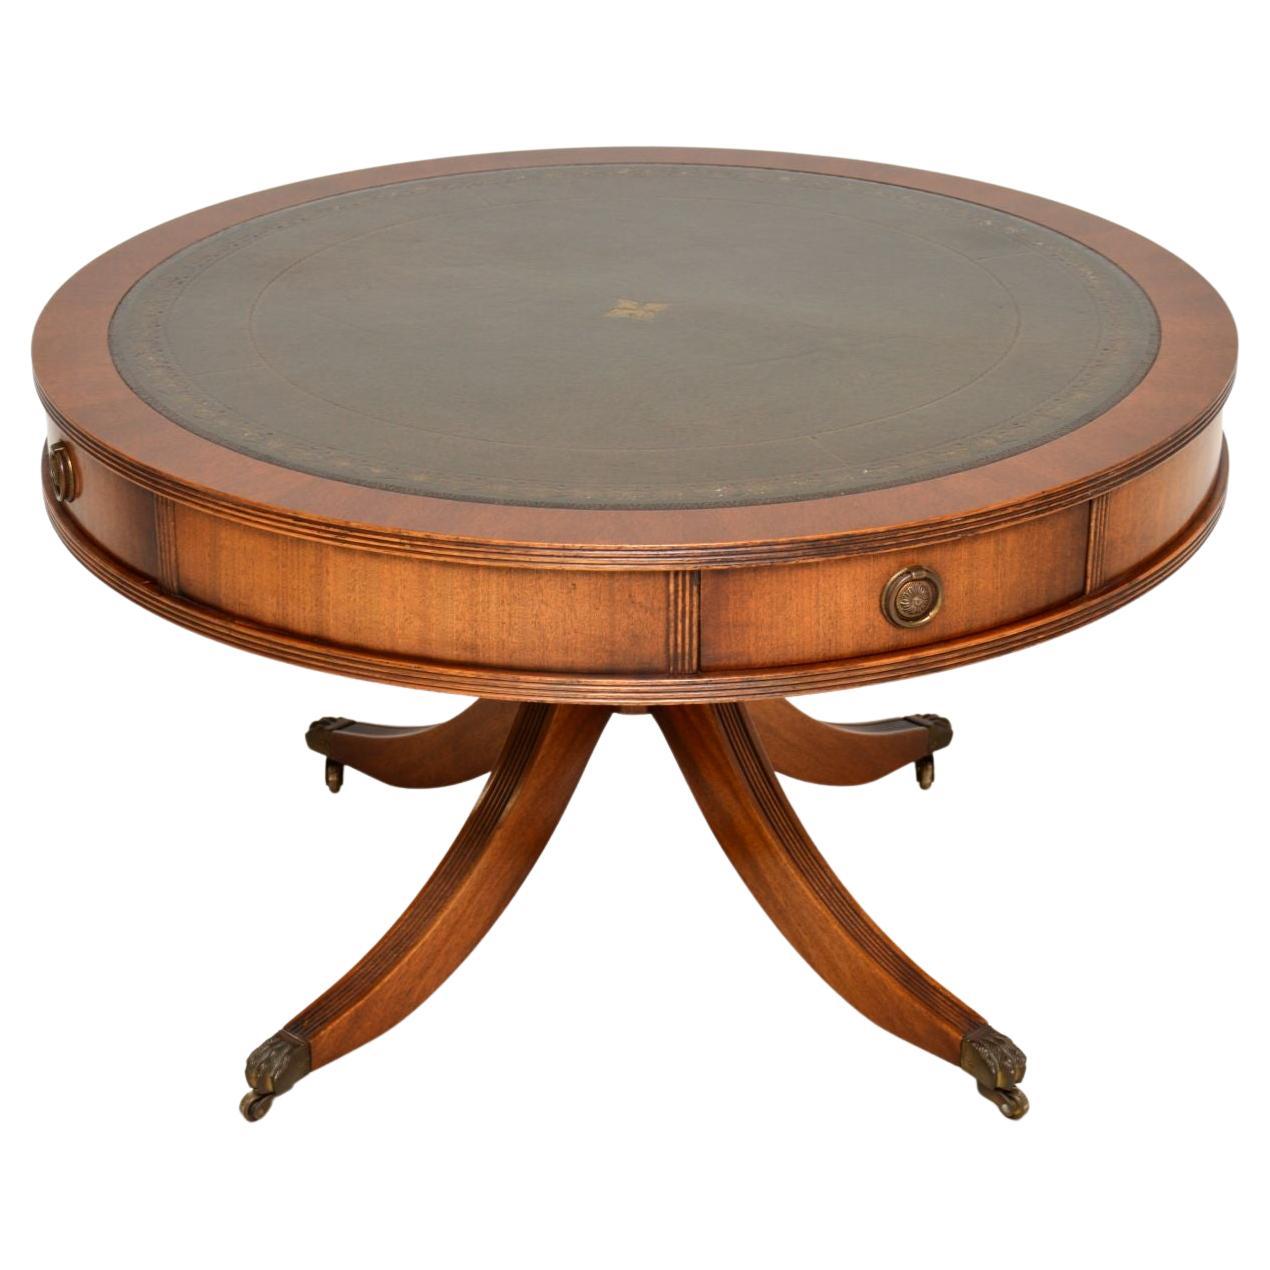 Antique Regency Style Leather Top Coffee Table